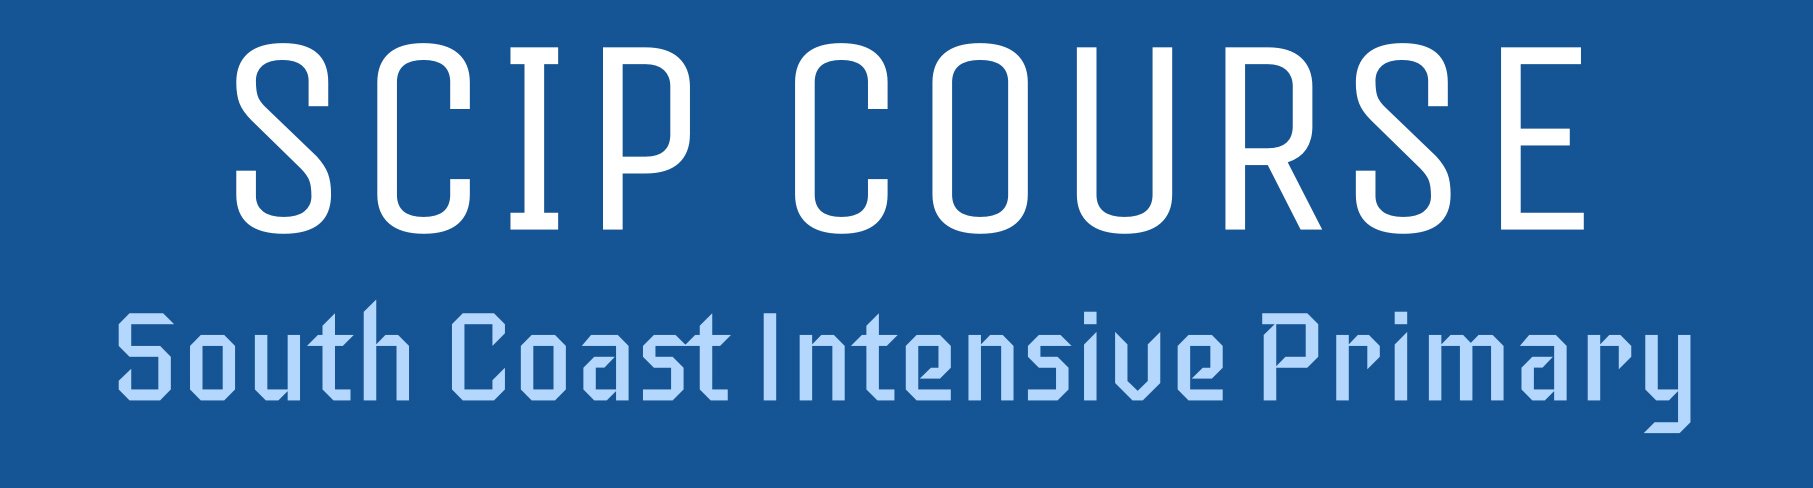 South Coast Intensive Primary Course